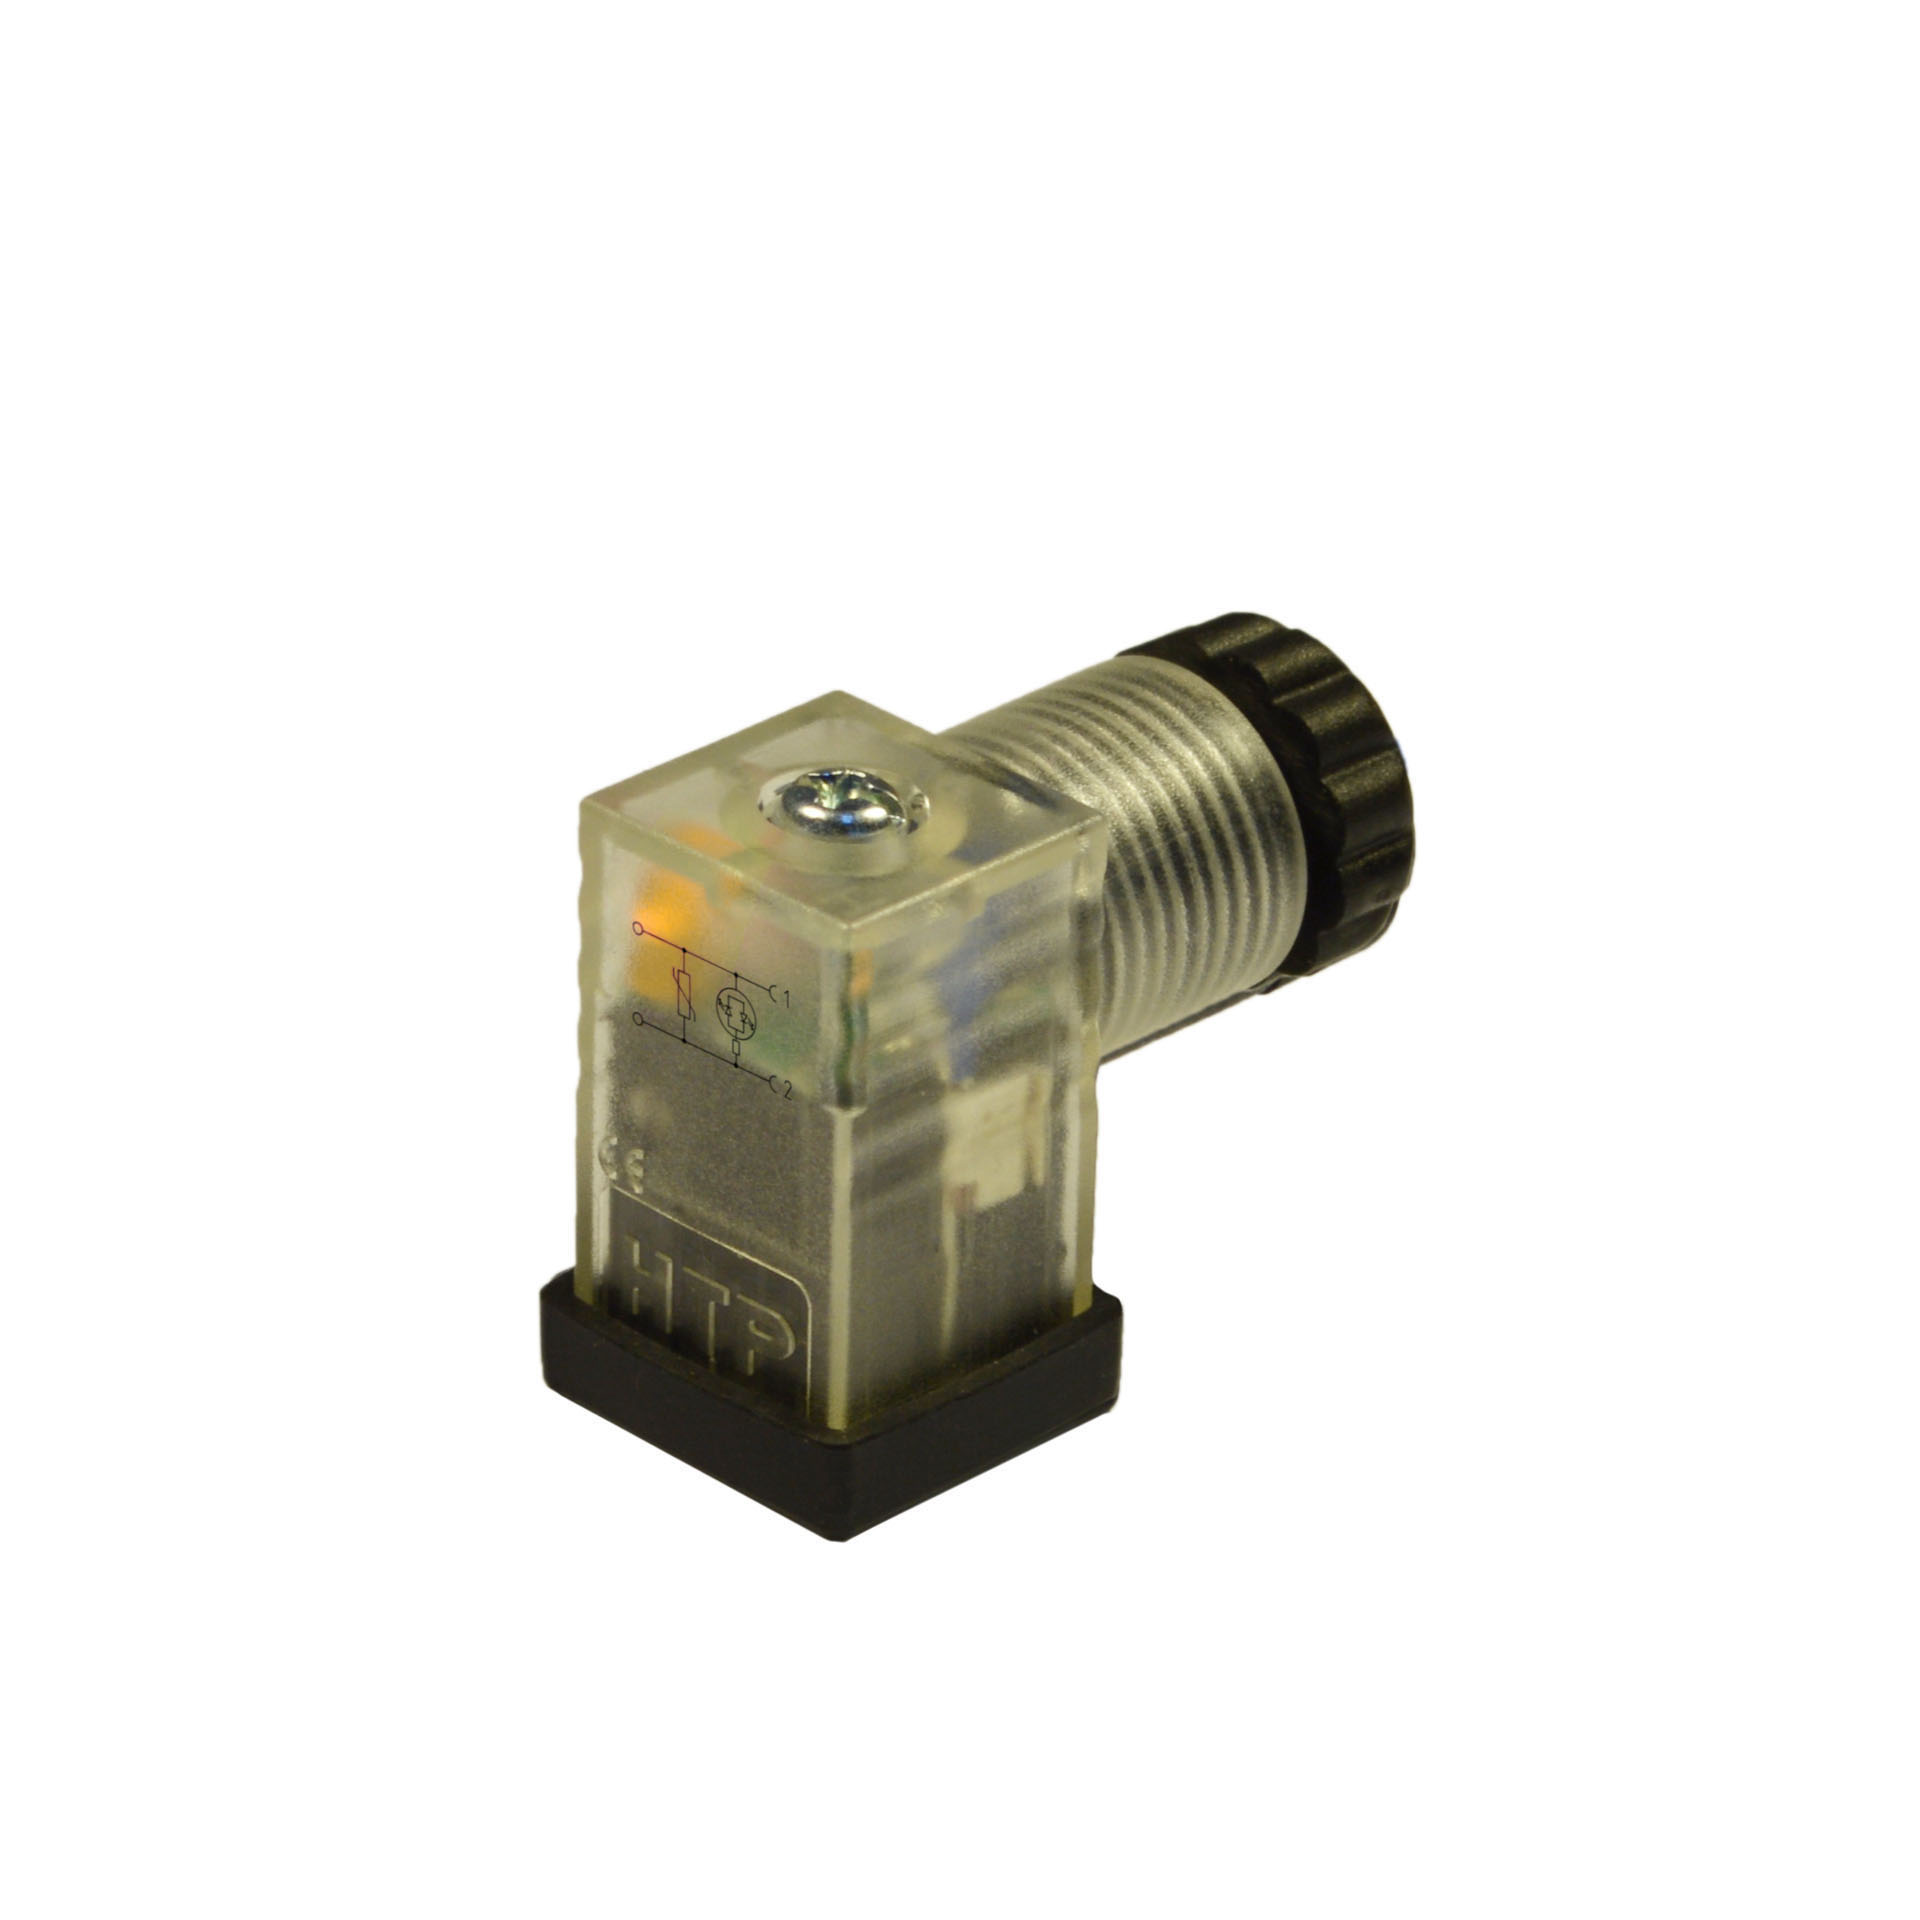 Industriale/C a cablare,2p+T(h.6),LED giallo+vdr,230VAC/DC,PG7